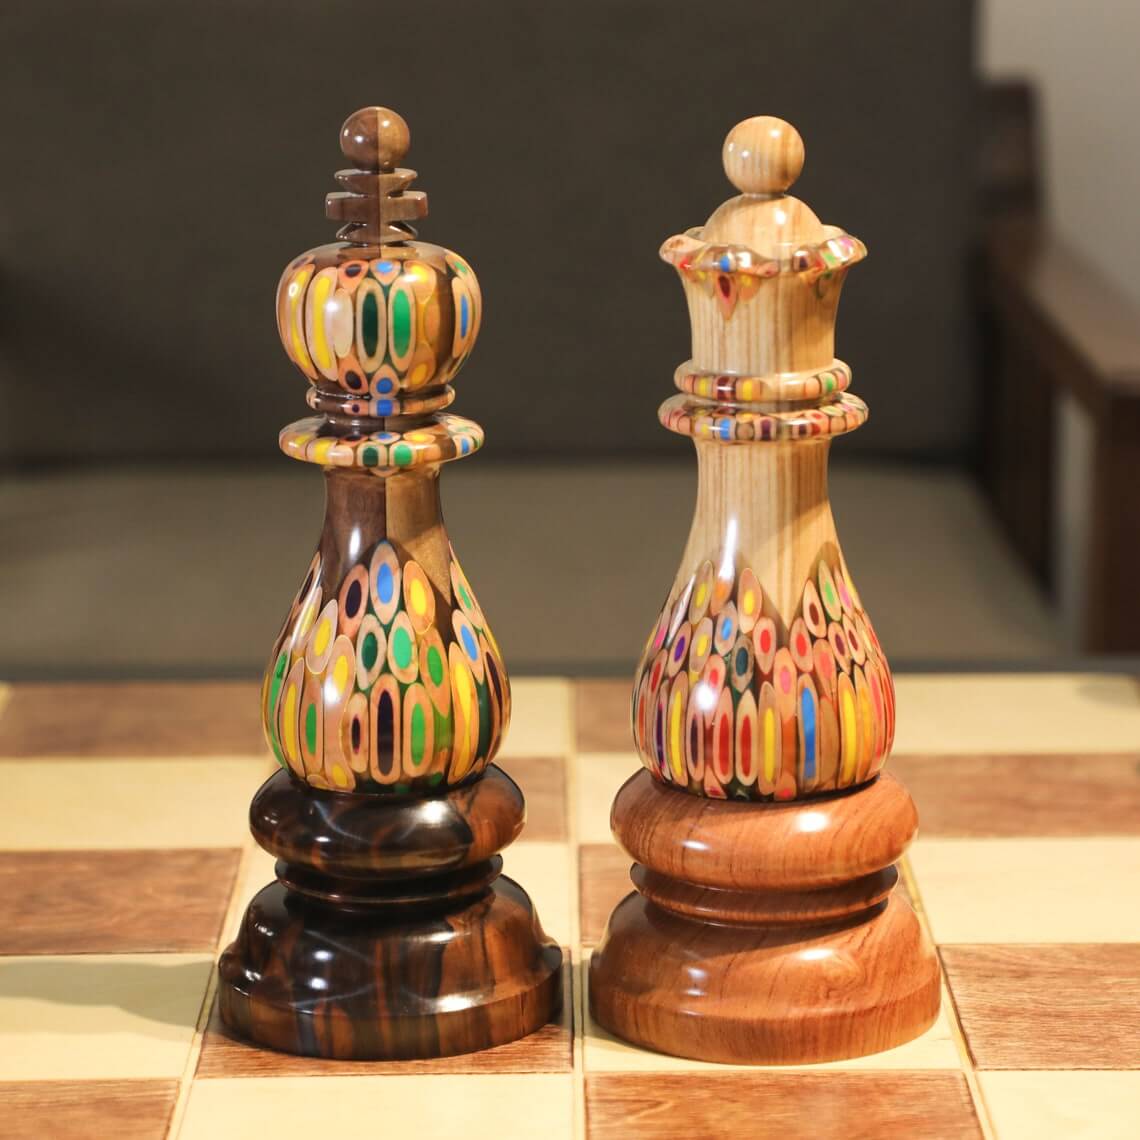 Deluxe Decorative King & Queen Chess Pieces (8)